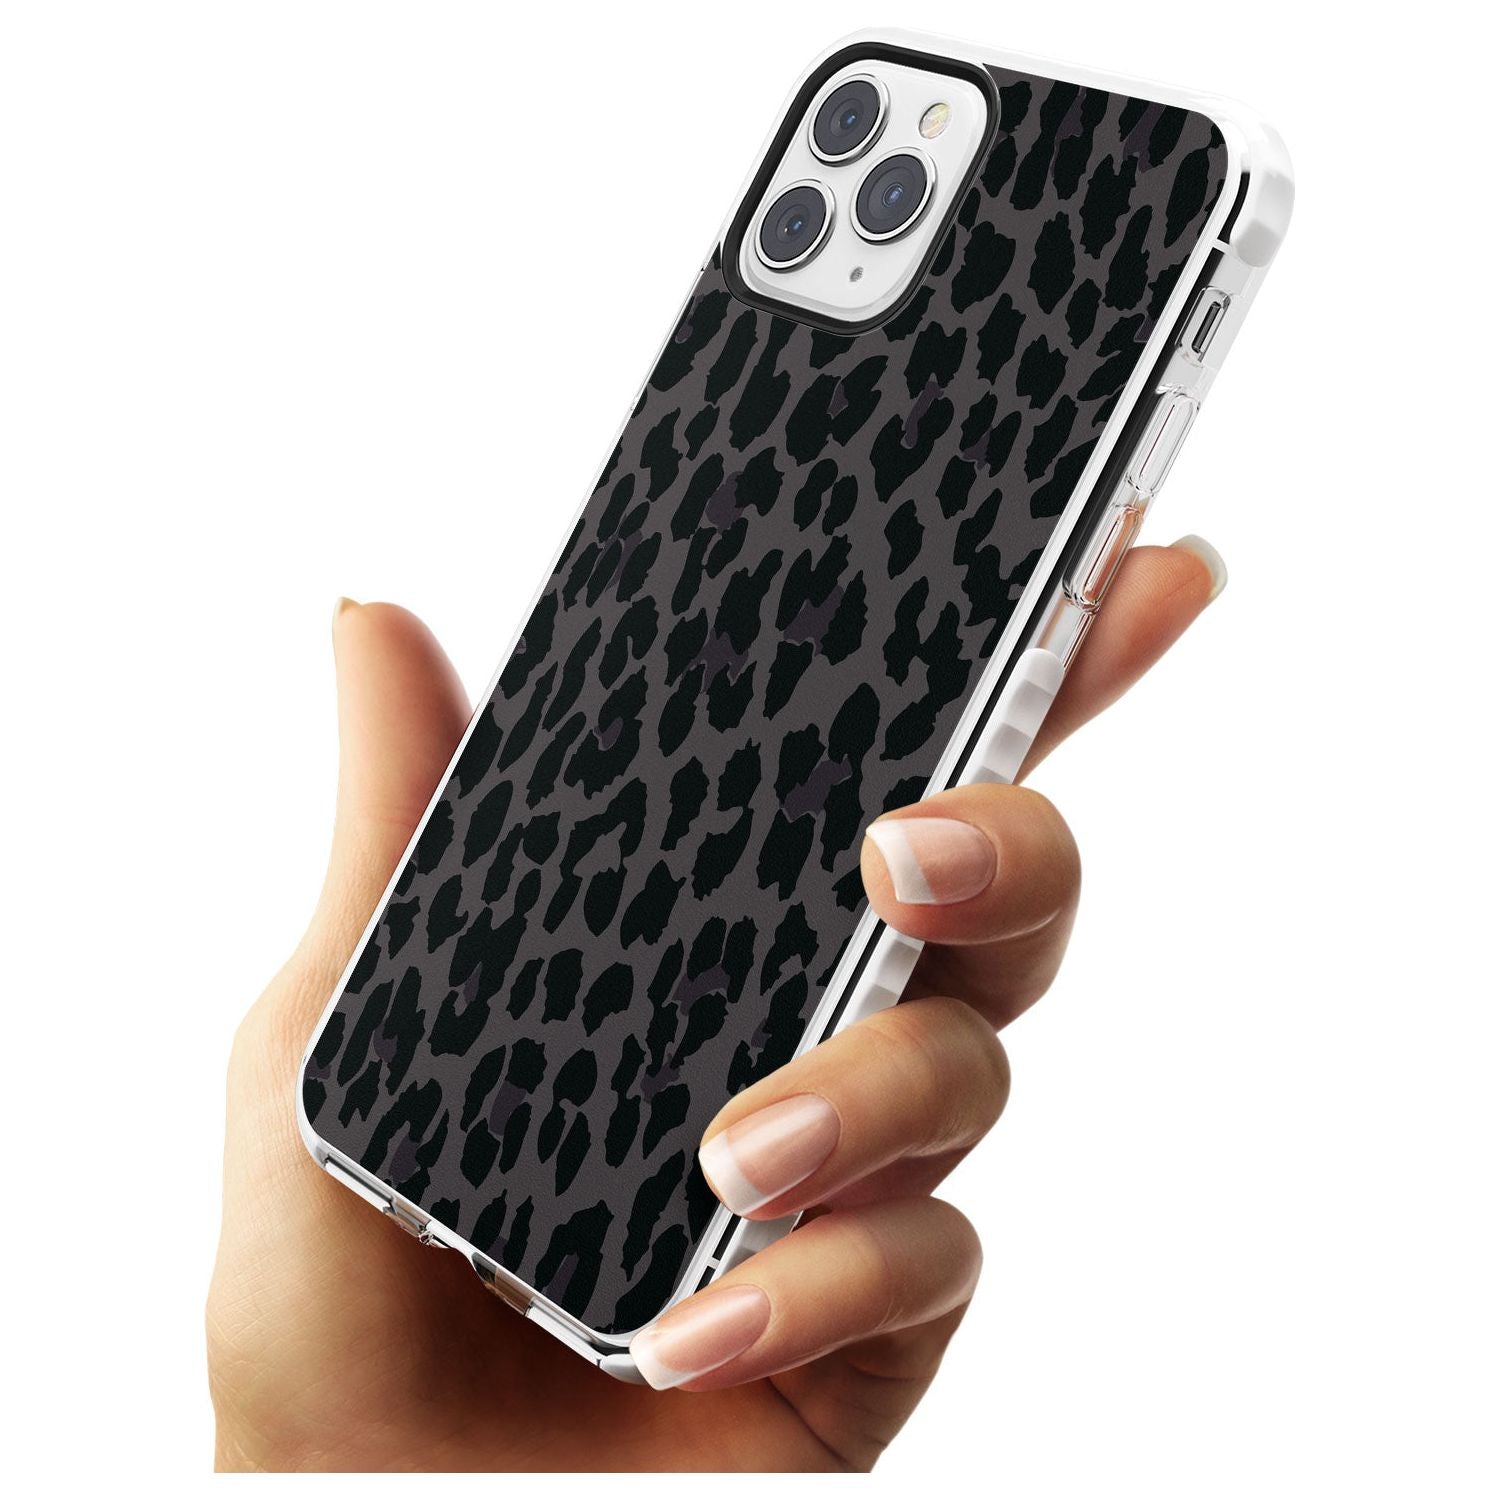 Dark Animal Print Pattern Large Leopard Impact Phone Case for iPhone 11 Pro Max